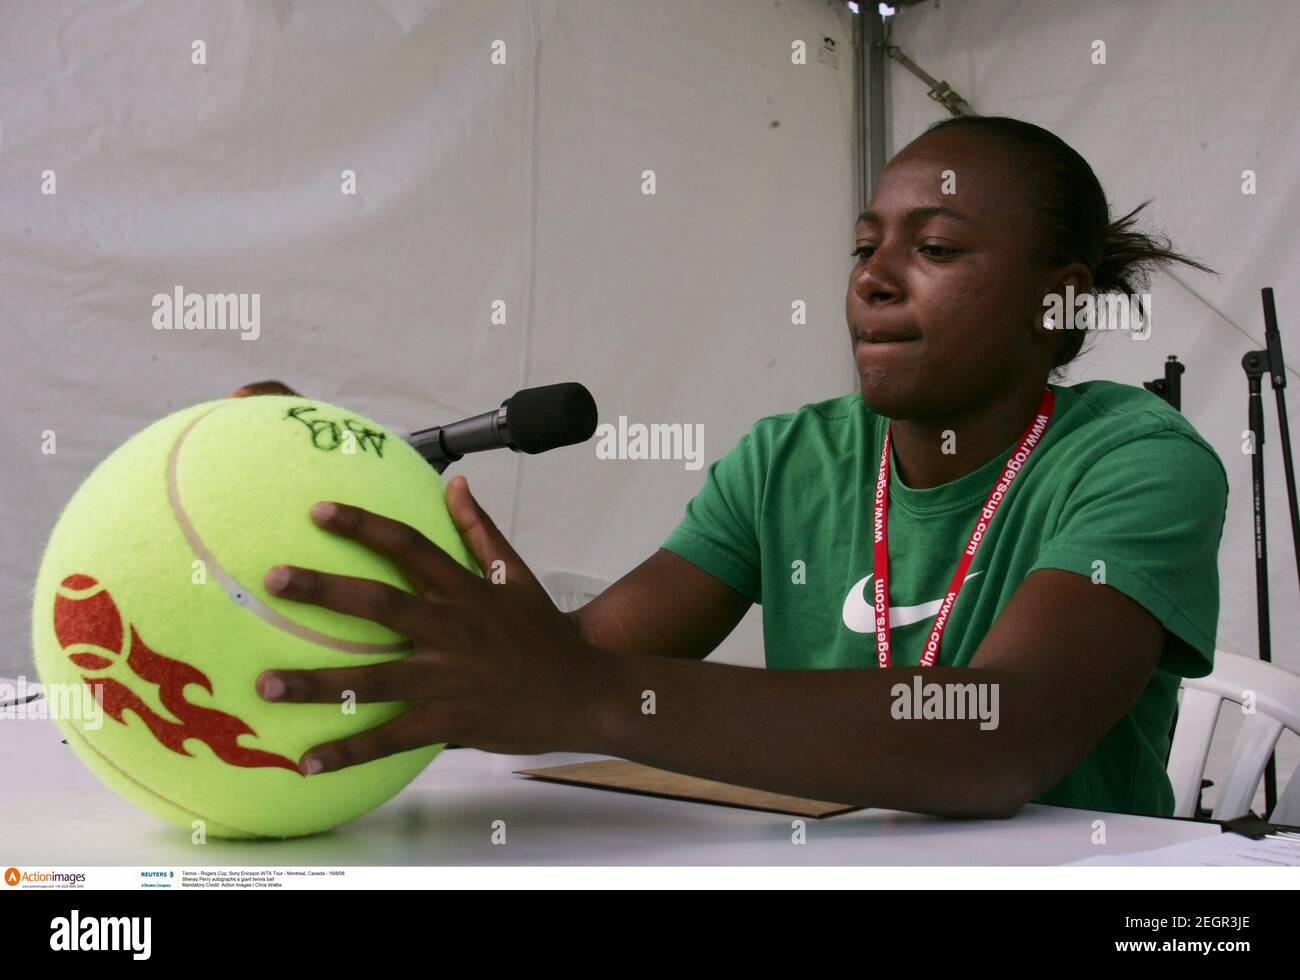 Tennis - Rogers Cup, Sony Ericsson WTA Tour - Montreal, Canada - 16/8/06  Shenay Perry autographs a giant tennis ball  Mandatory Credit: Action Images / Chris Wattie Stock Photo